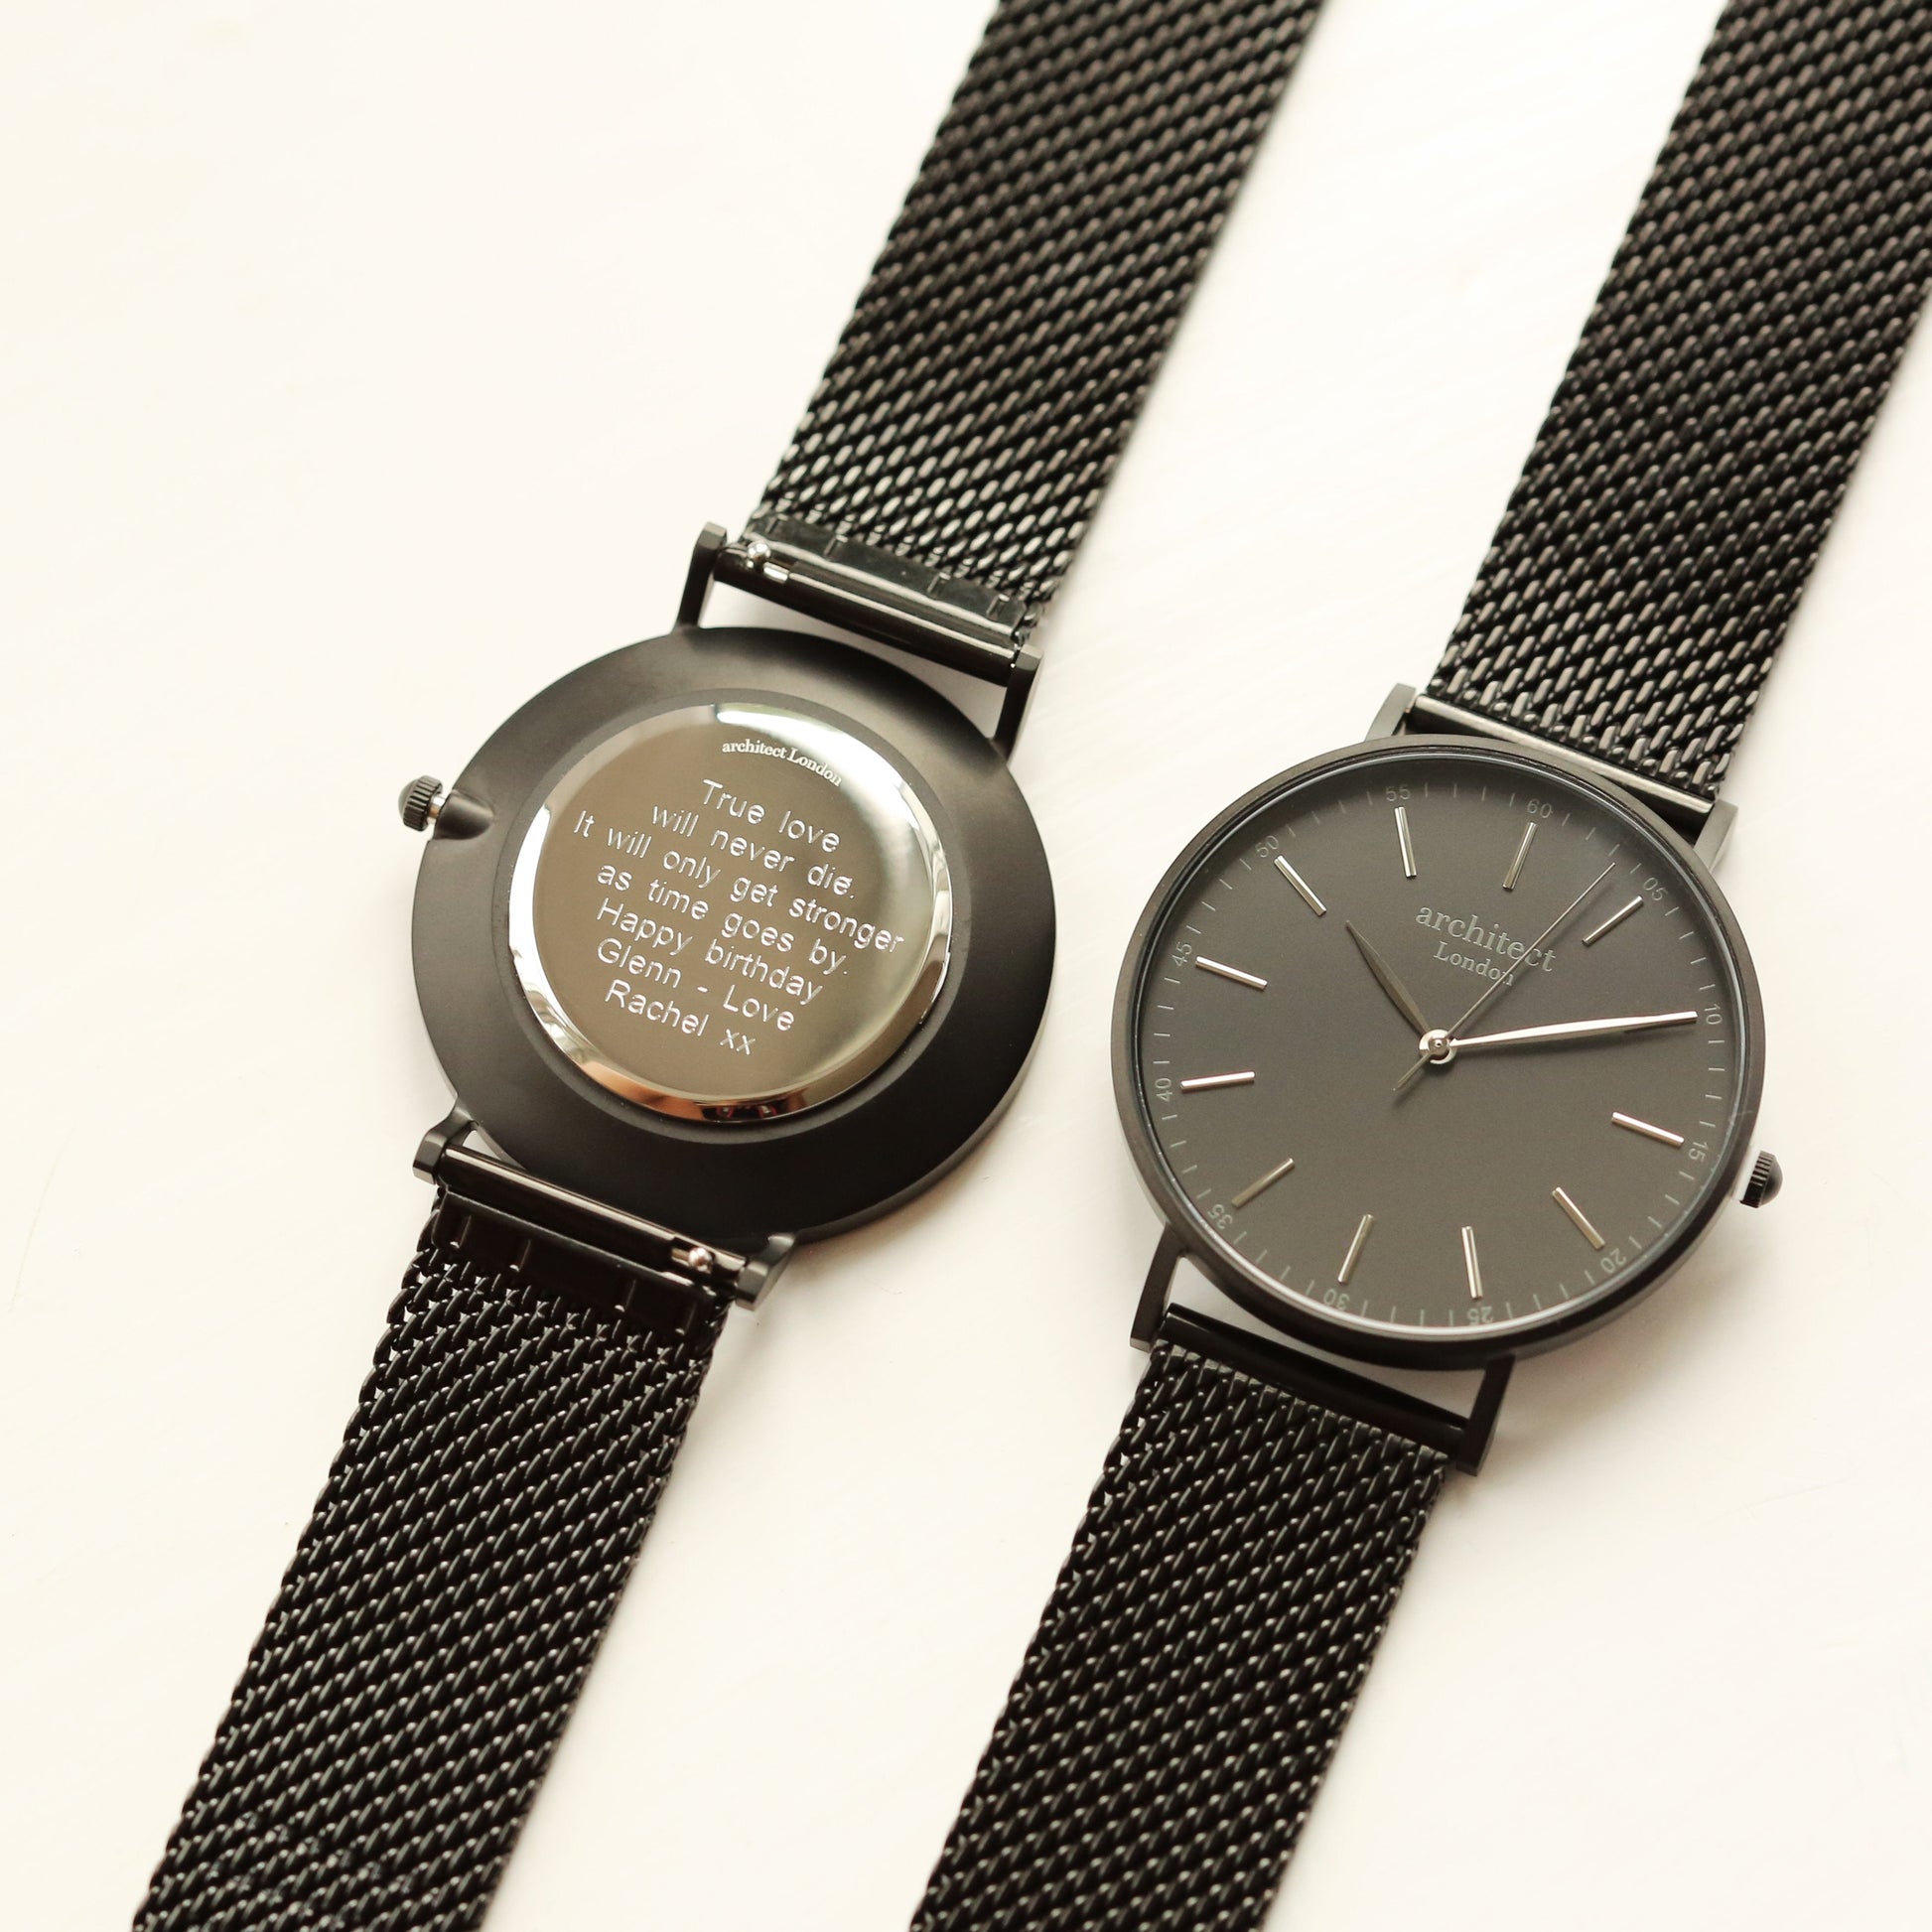 Personalized Men's Watches - Men's Minimalist Engraved Watch In Pitch Black Mesh 